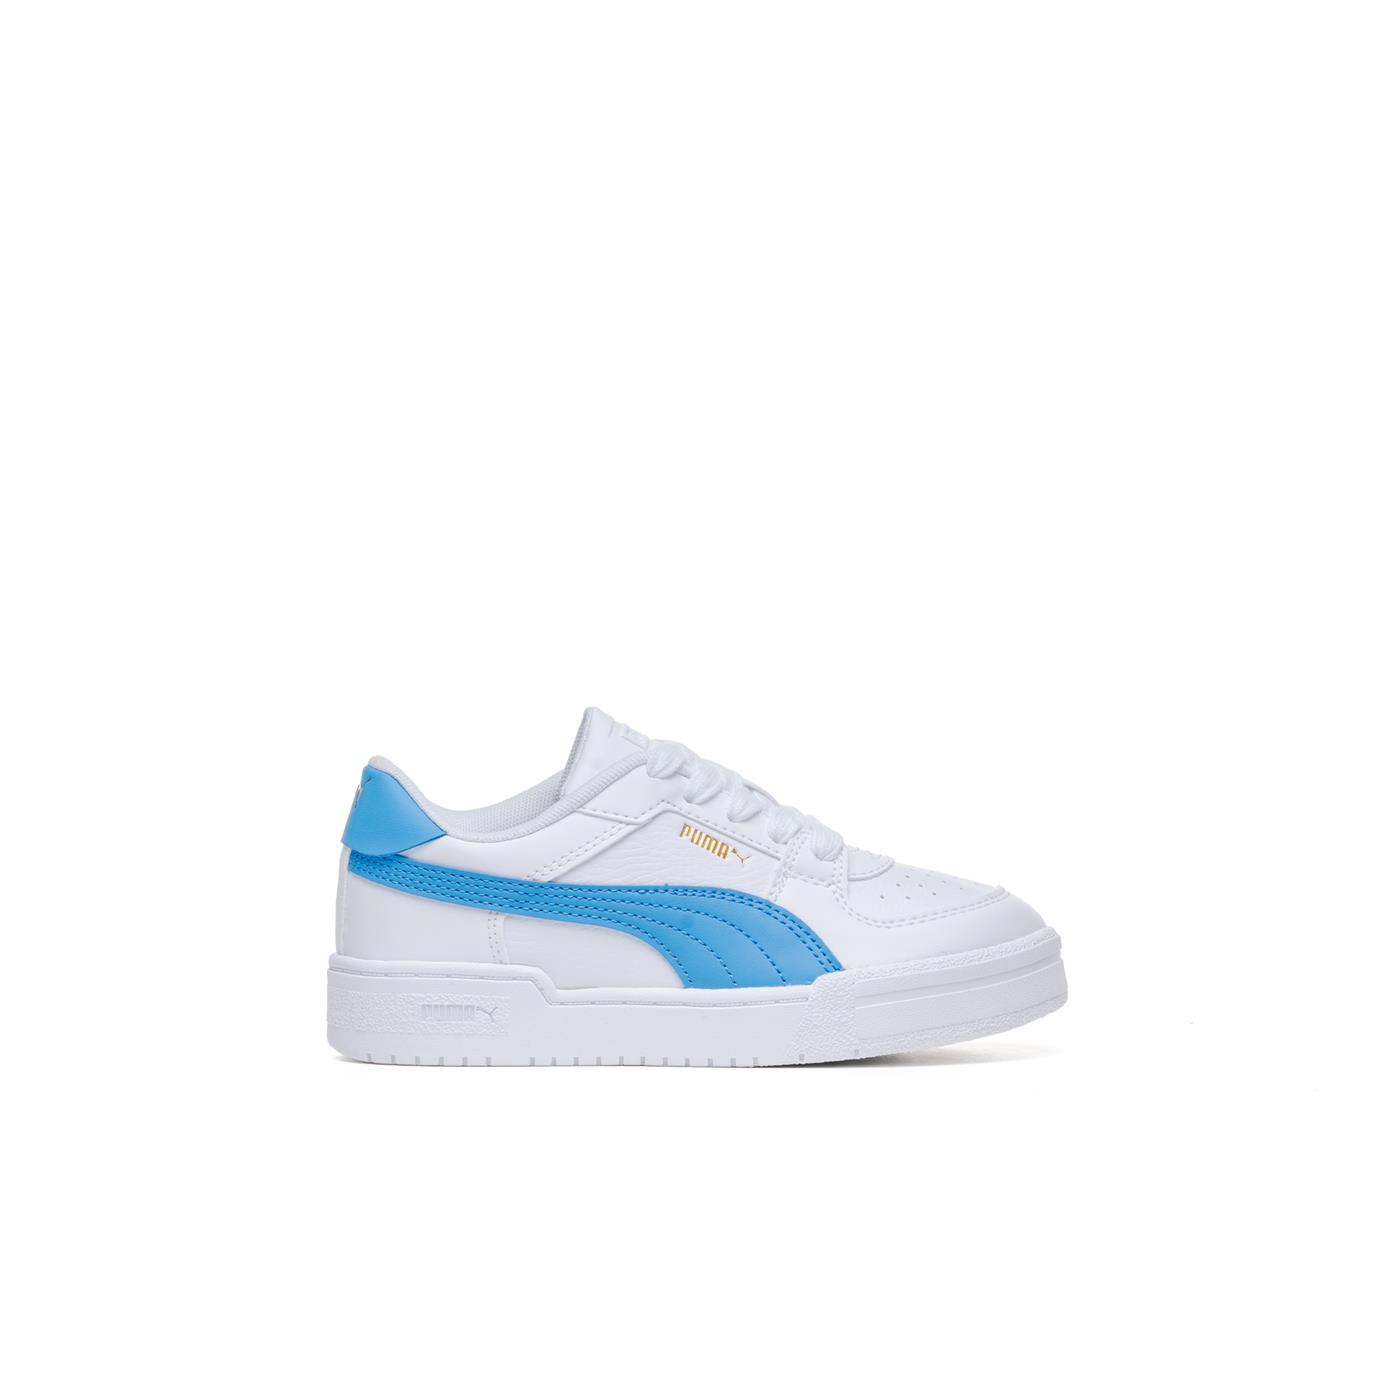 RvceShops | Sneakers PUMA CA White Classic Child 16 Puma amarillas for sneakers Pro | PS - mujer | 382278